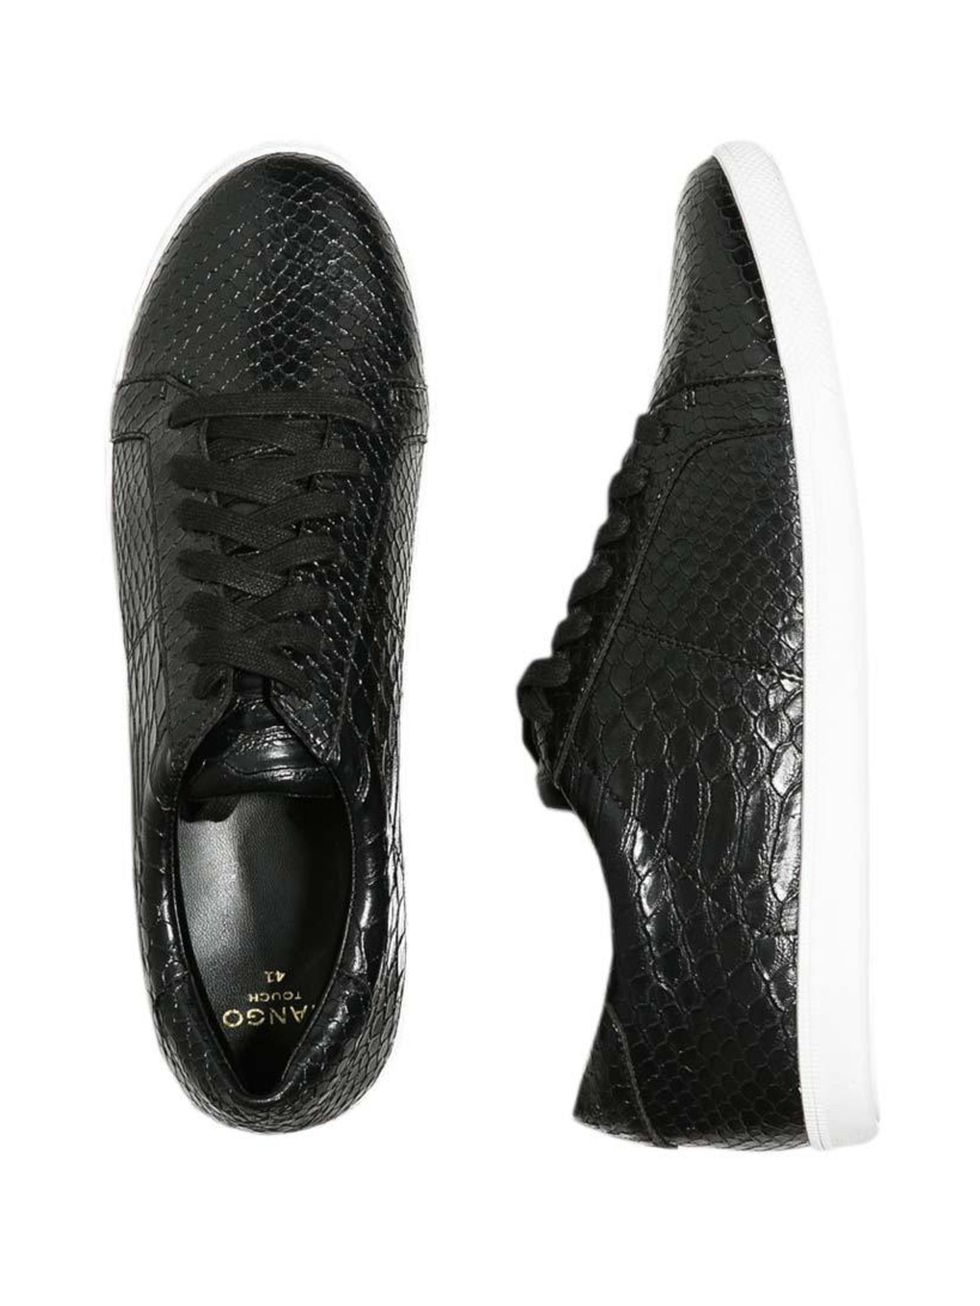 <p>Trainers you could wear out for cocktails. Go on then, make ours a Negroni...</p>

<p> </p>

<p><a href="http://shop.mango.com/GB/p0/women/accessories/shoes/faux-leather-sneakers/?id=33083678_02&n=1&s=accesorios.zapatos&ident=0__0_1413824783028&ts=1413